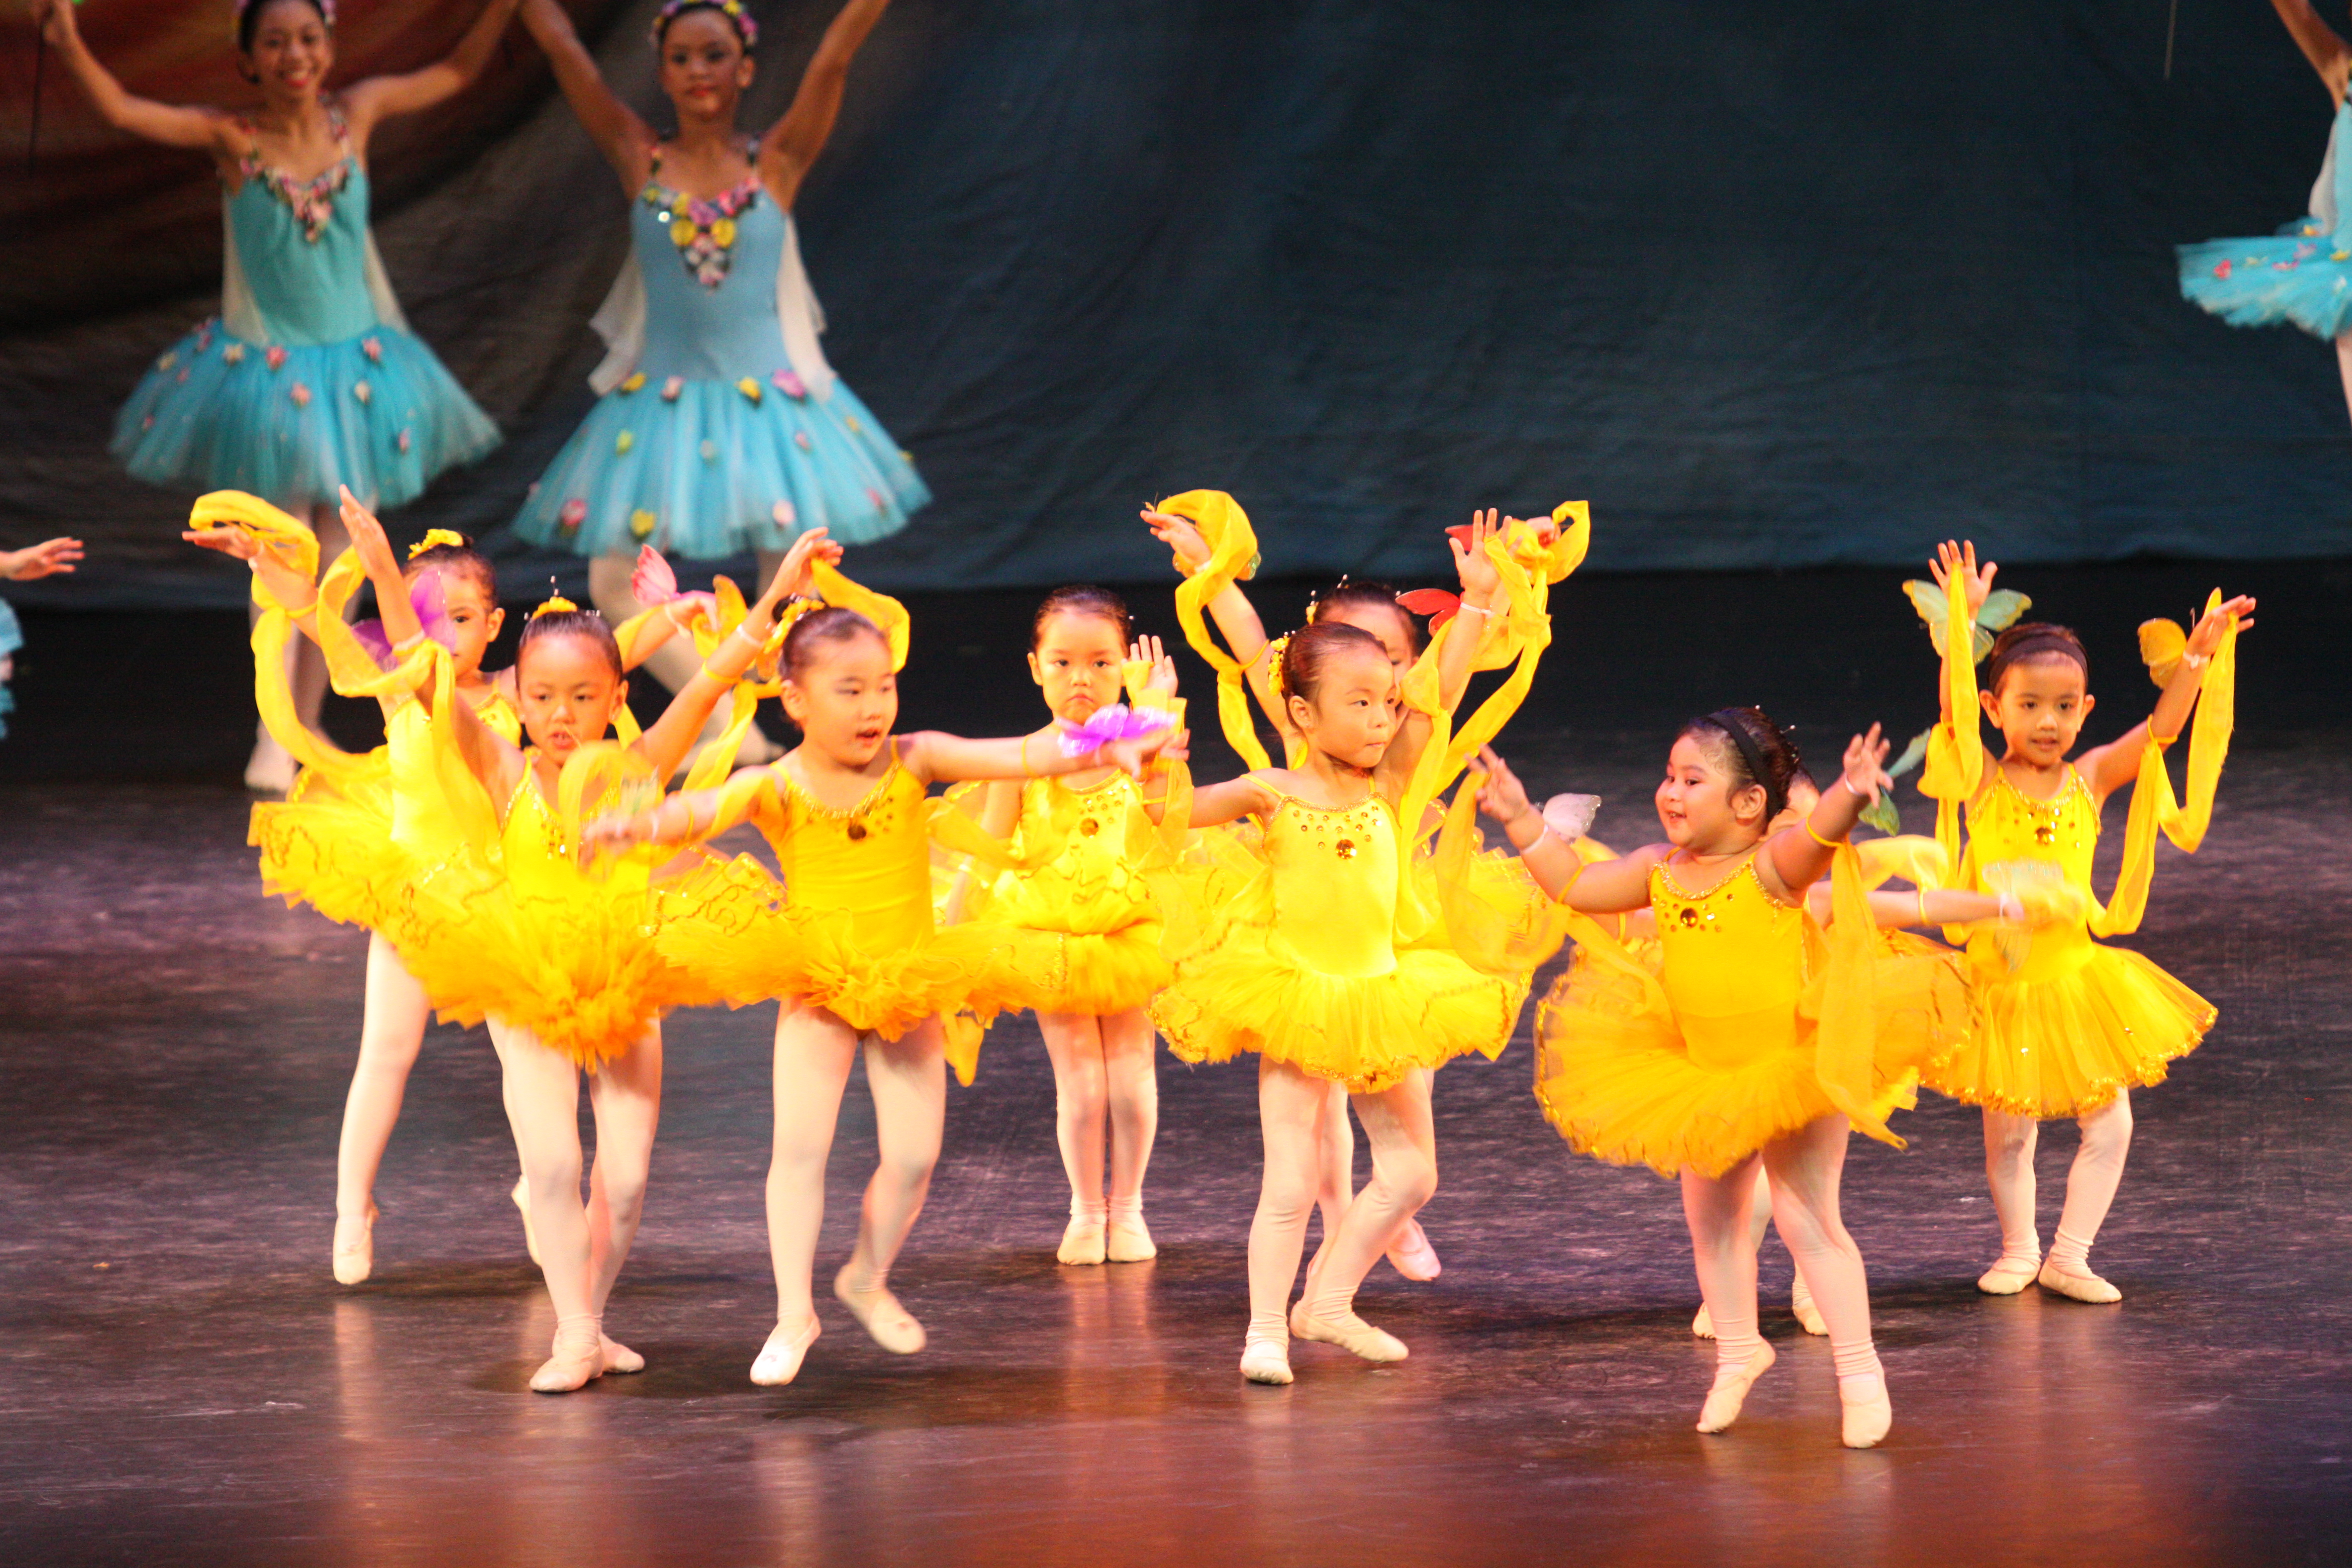 Little ones will experience performing in a professional theater during the recital